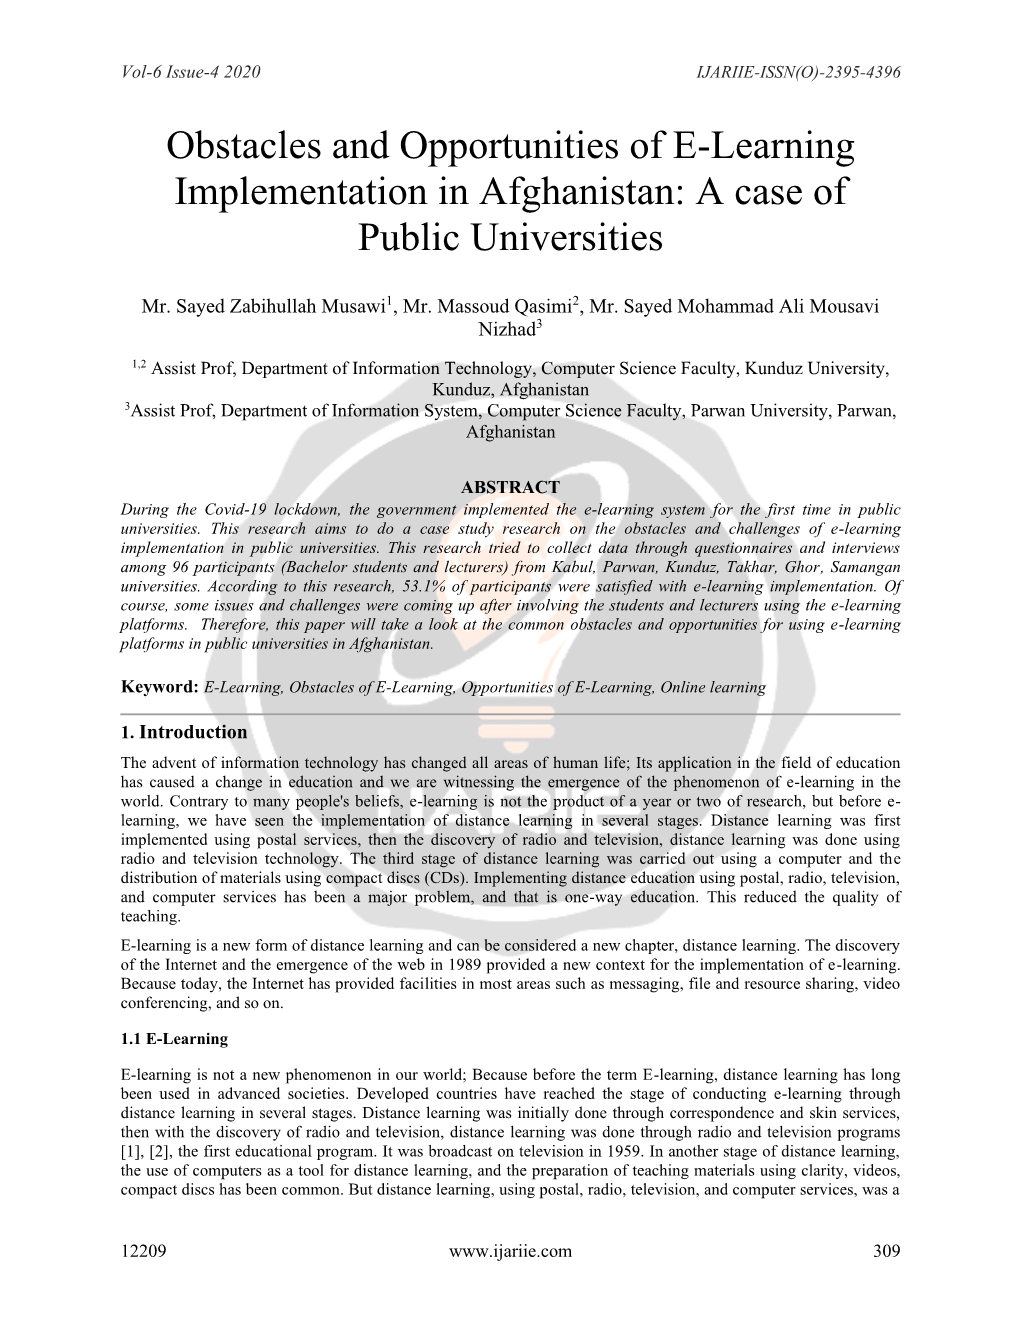 Obstacles and Opportunities of E-Learning Implementation in Afghanistan: a Case of Public Universities